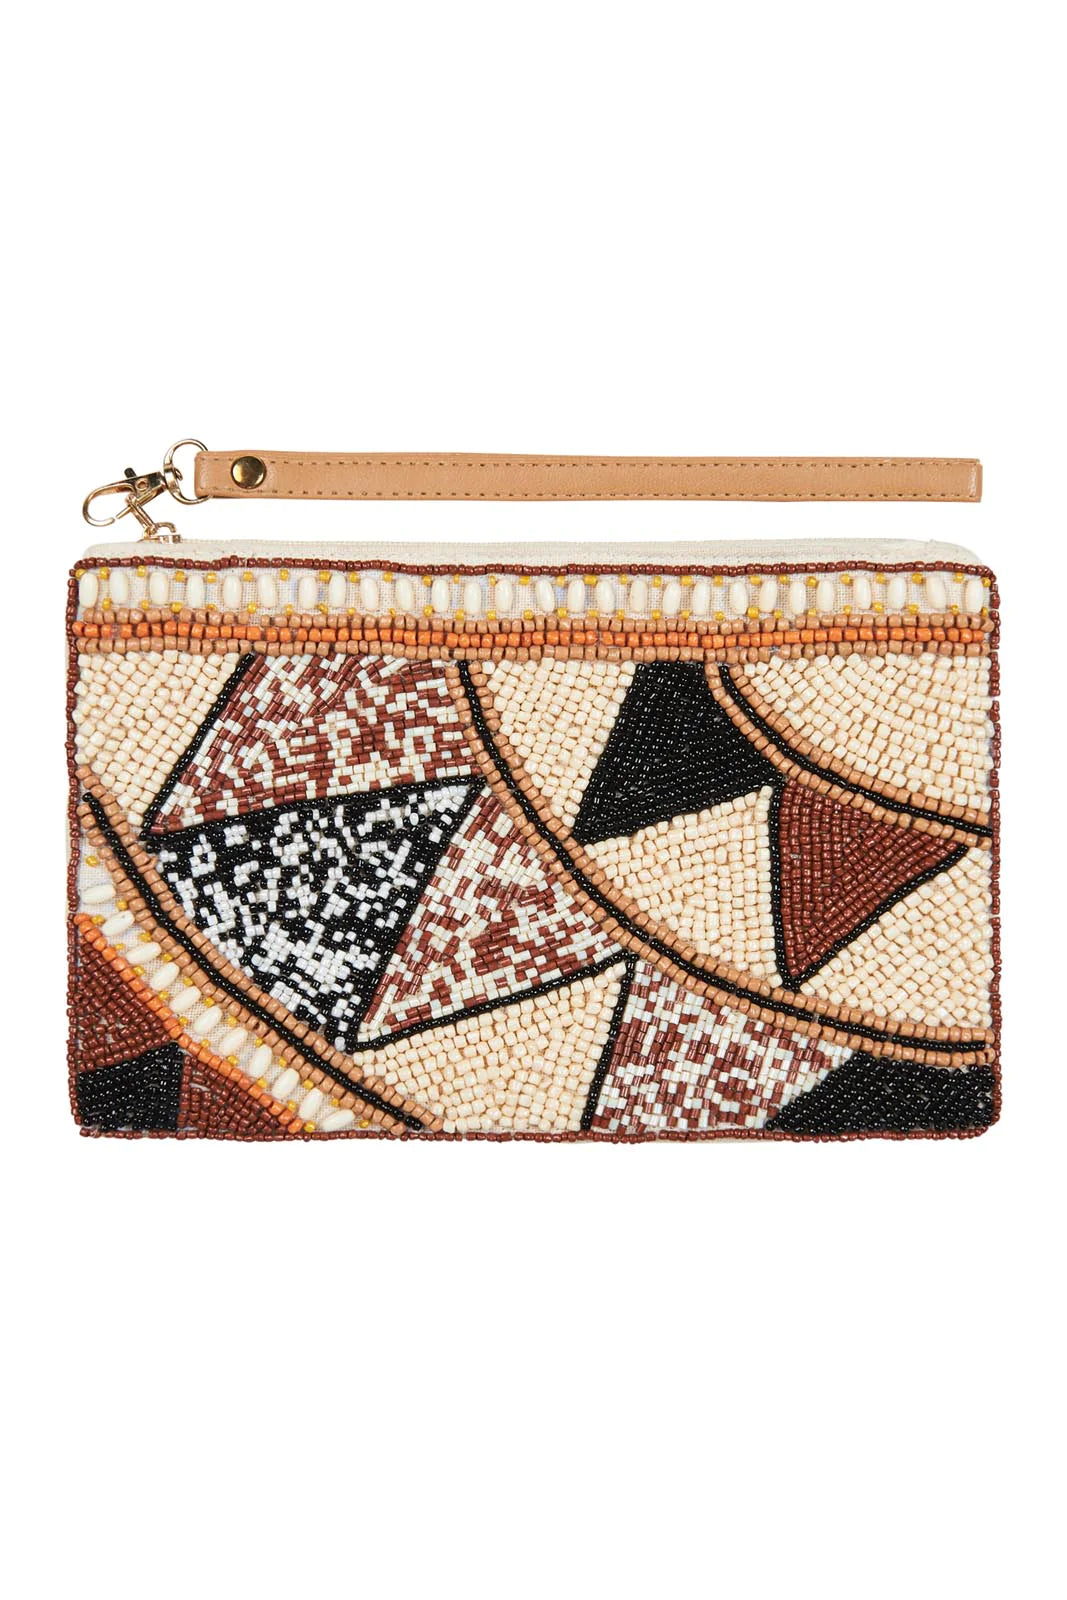 EB&IVE CARRIE CLUTCH